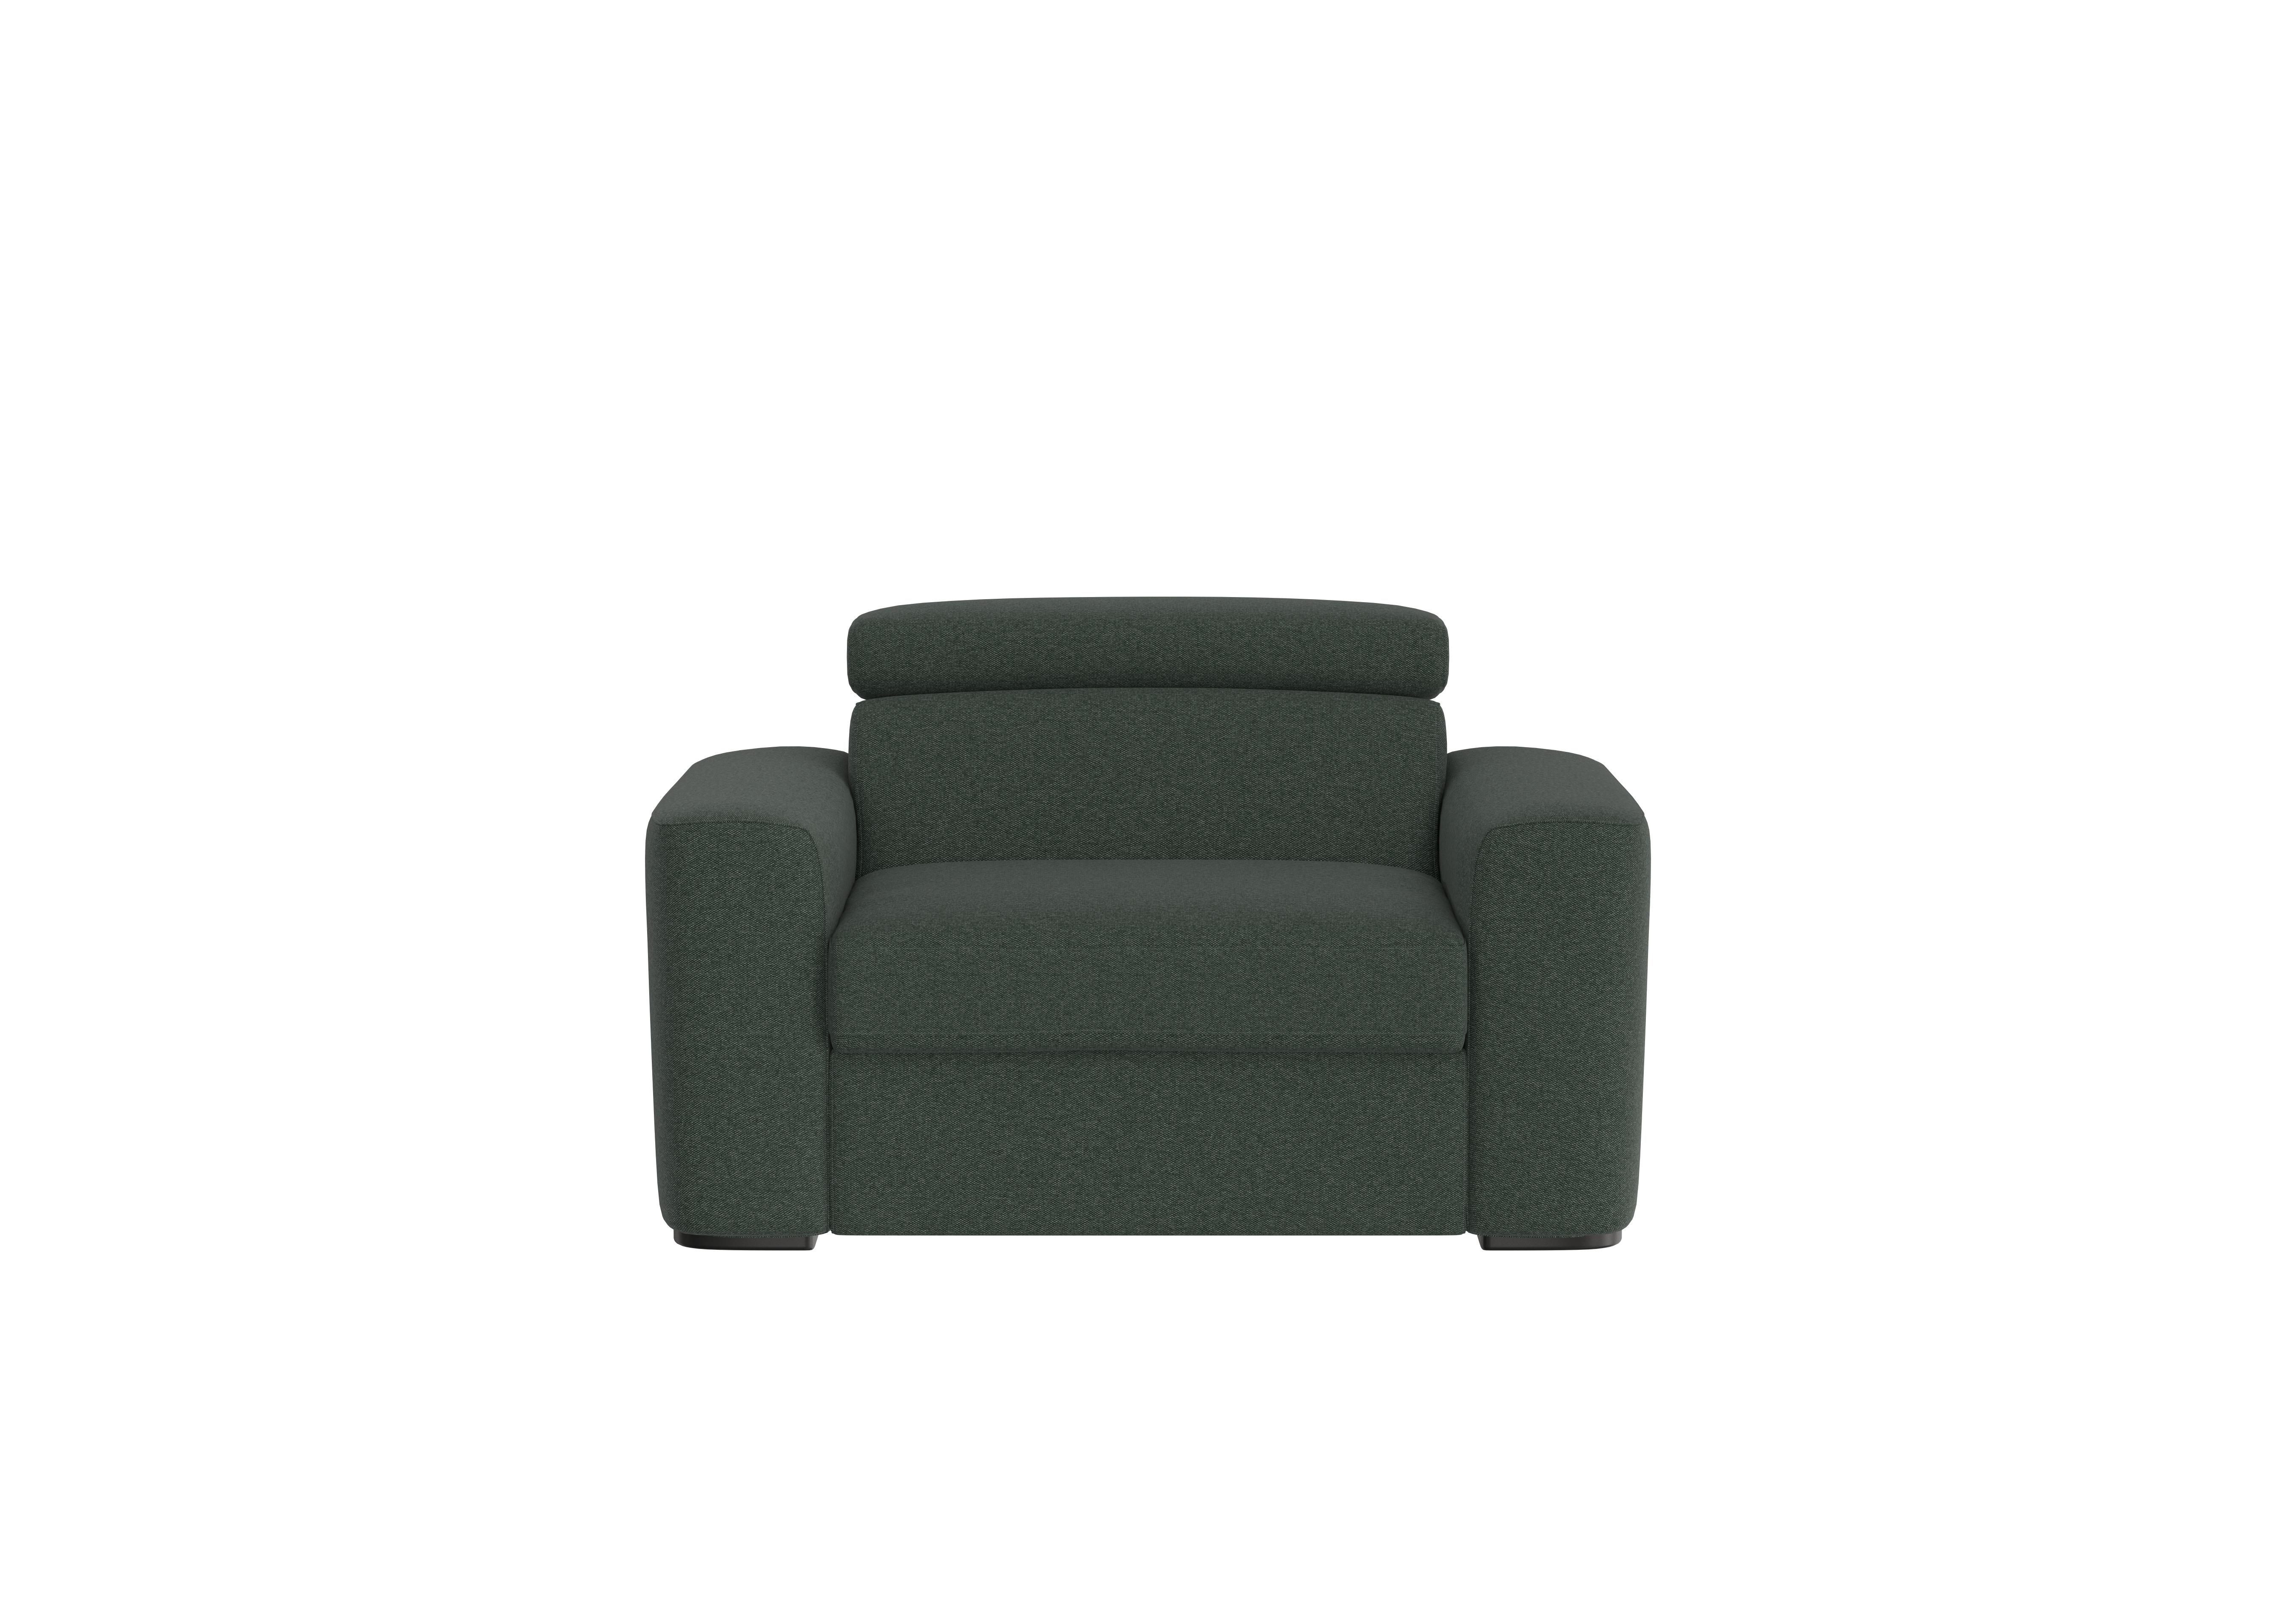 Infinity Fabric Chair Sofa Bed in Fab-Ska-R48 Moss Green on Furniture Village